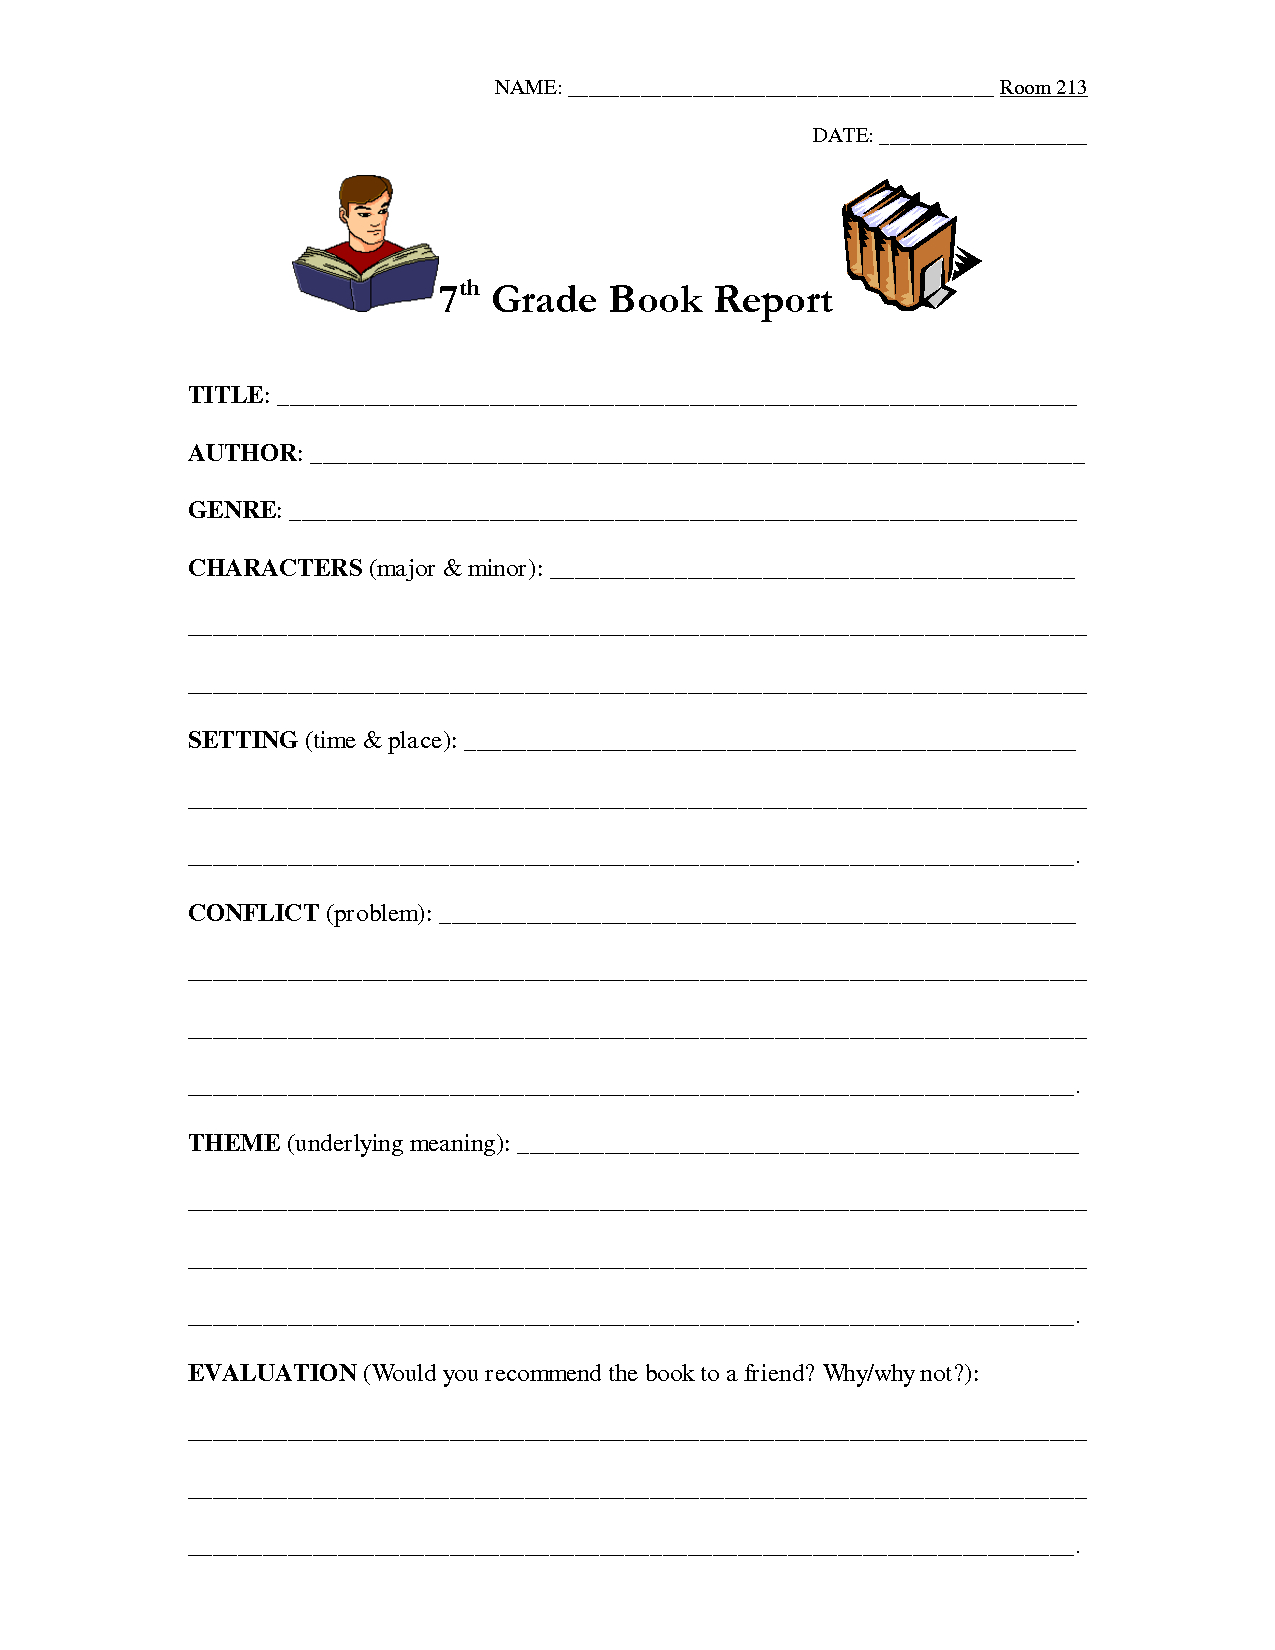 7Th Grade Book Report Outline | Education | Book Report Within Student Grade Report Template